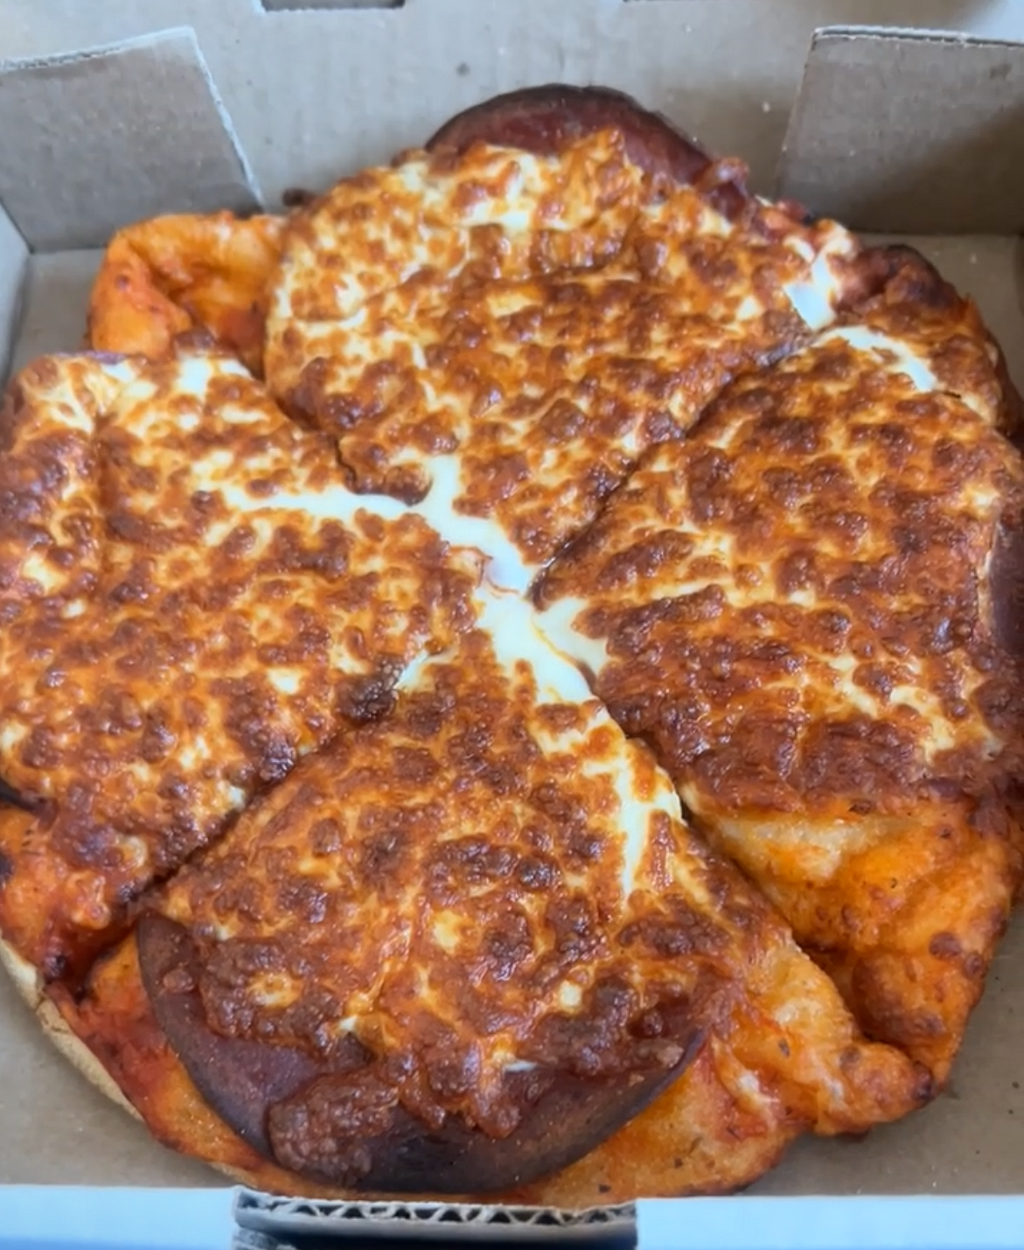 Close-up of the pepperoni pizza